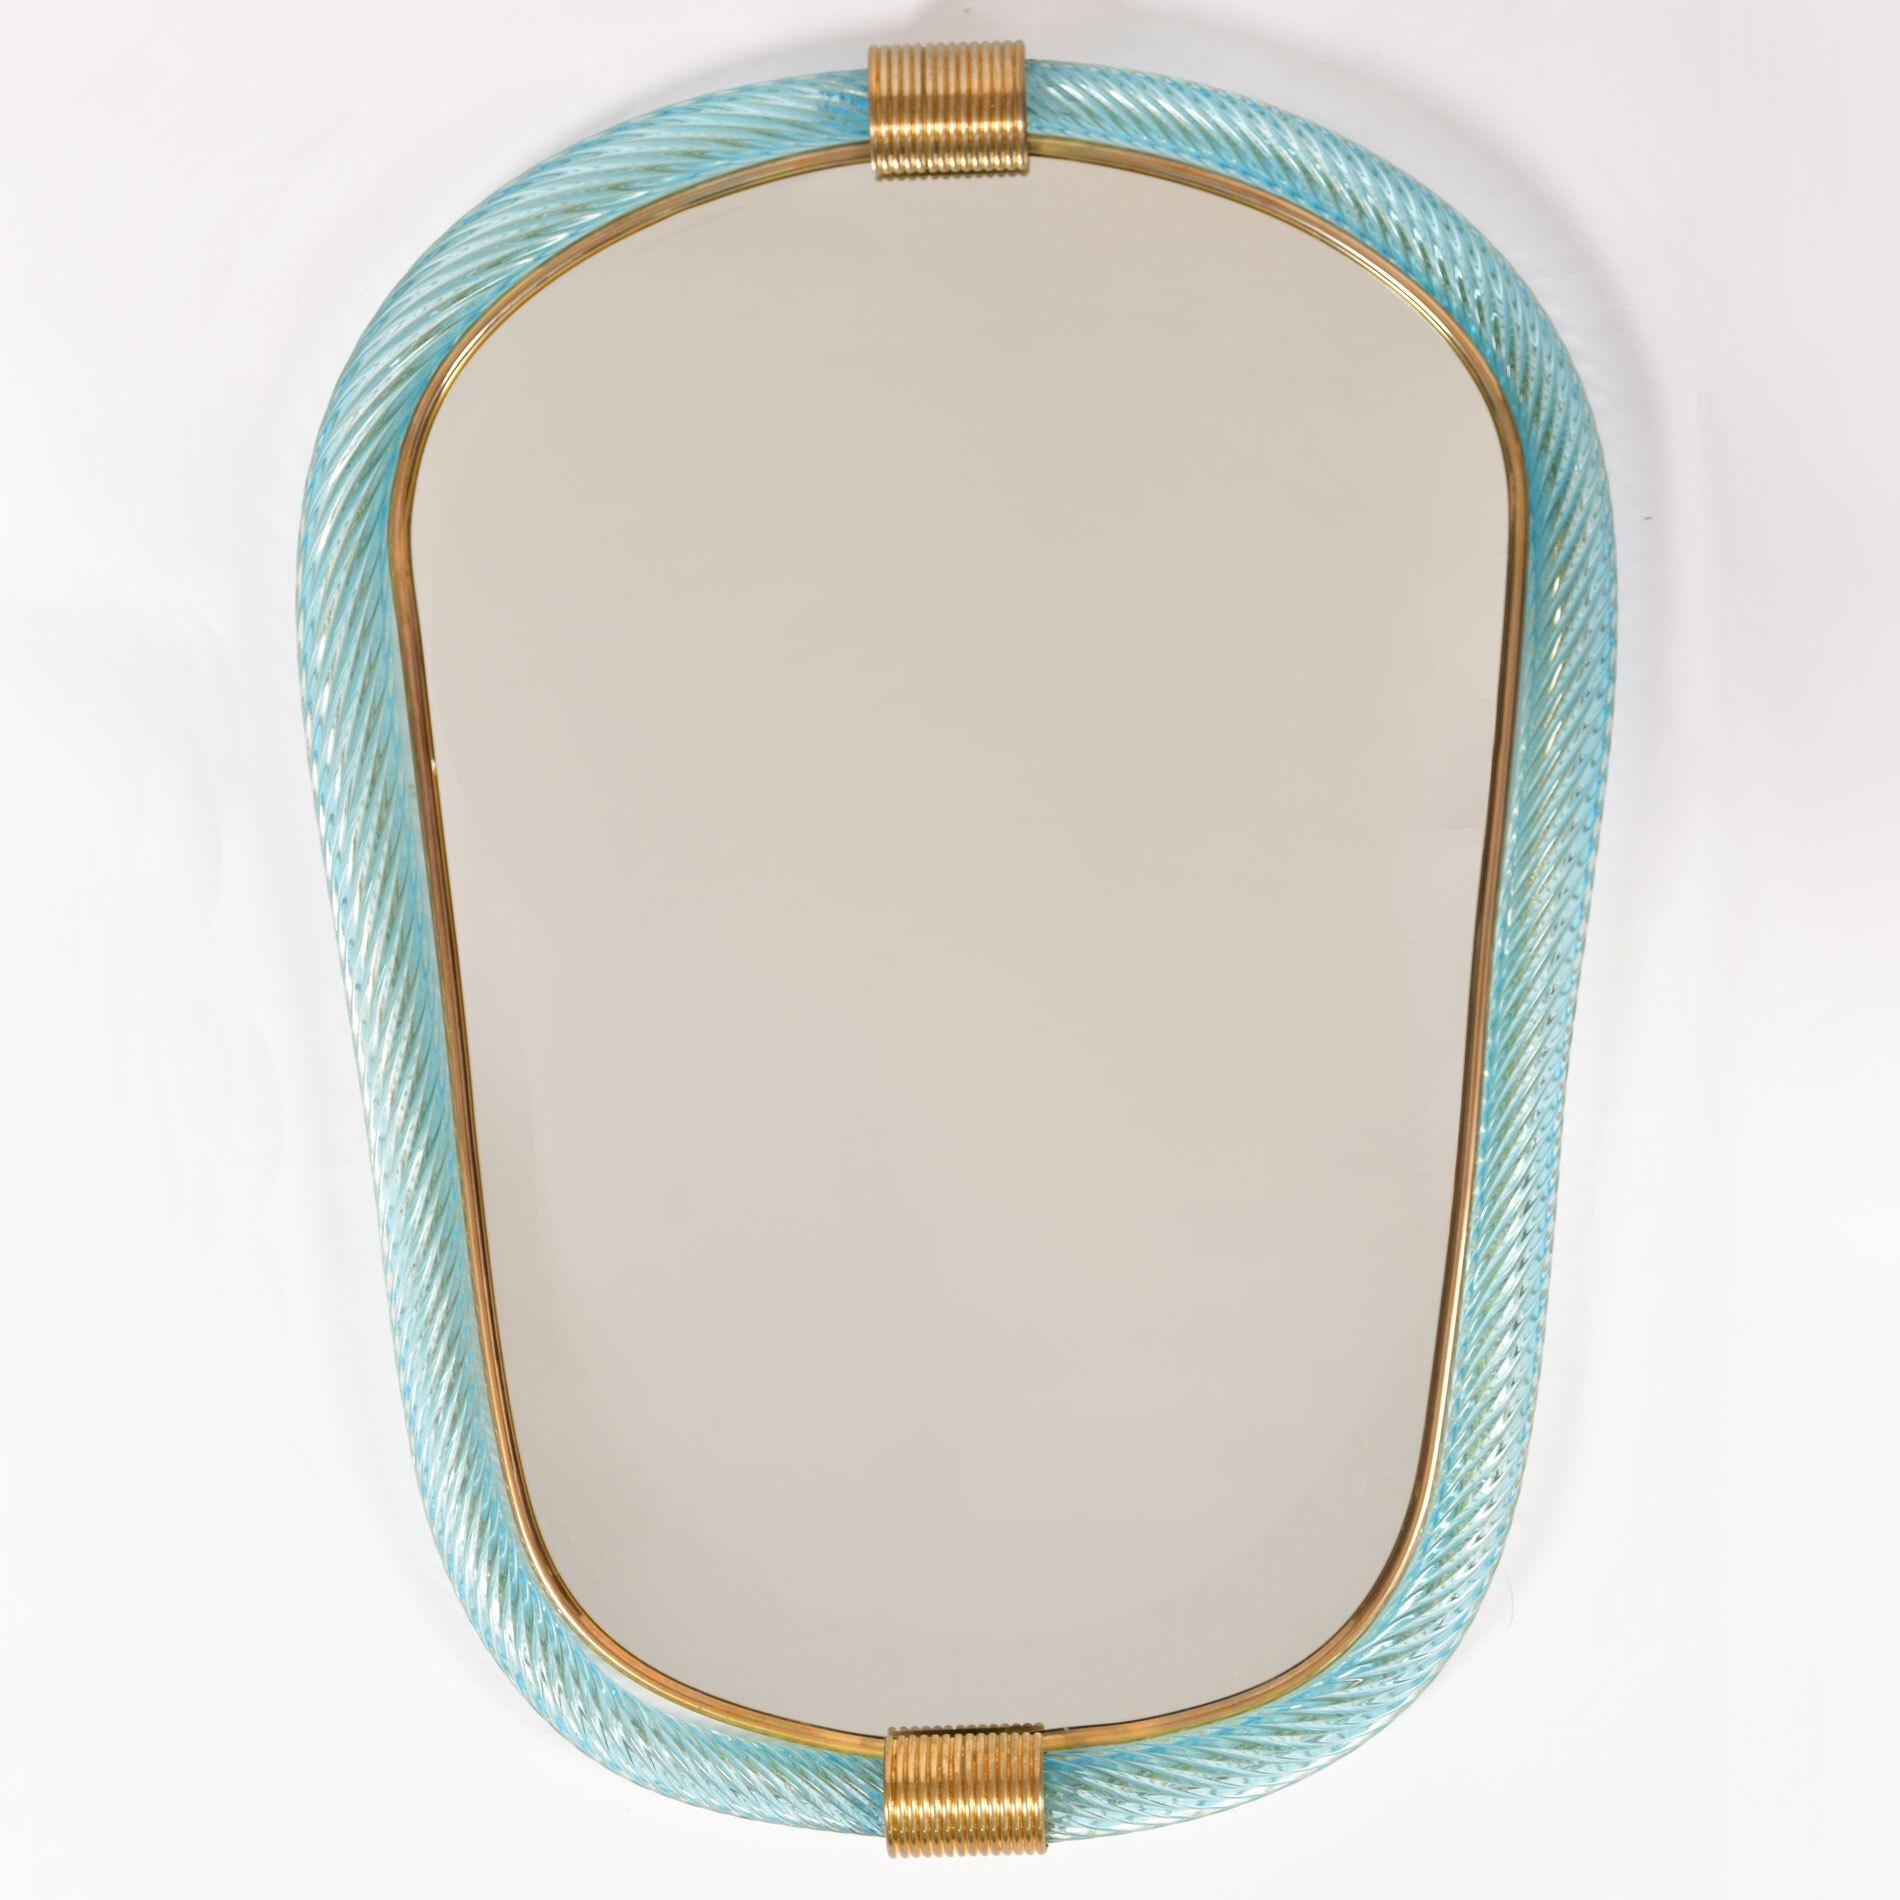 Pale green ribbed hand blown Murano glass eliptical mirror with two brass fluted clasps at the top and bottom, the inner edge lined with slender brass filet.

Also available in palest pink.

6 week lead-time if not in stock.